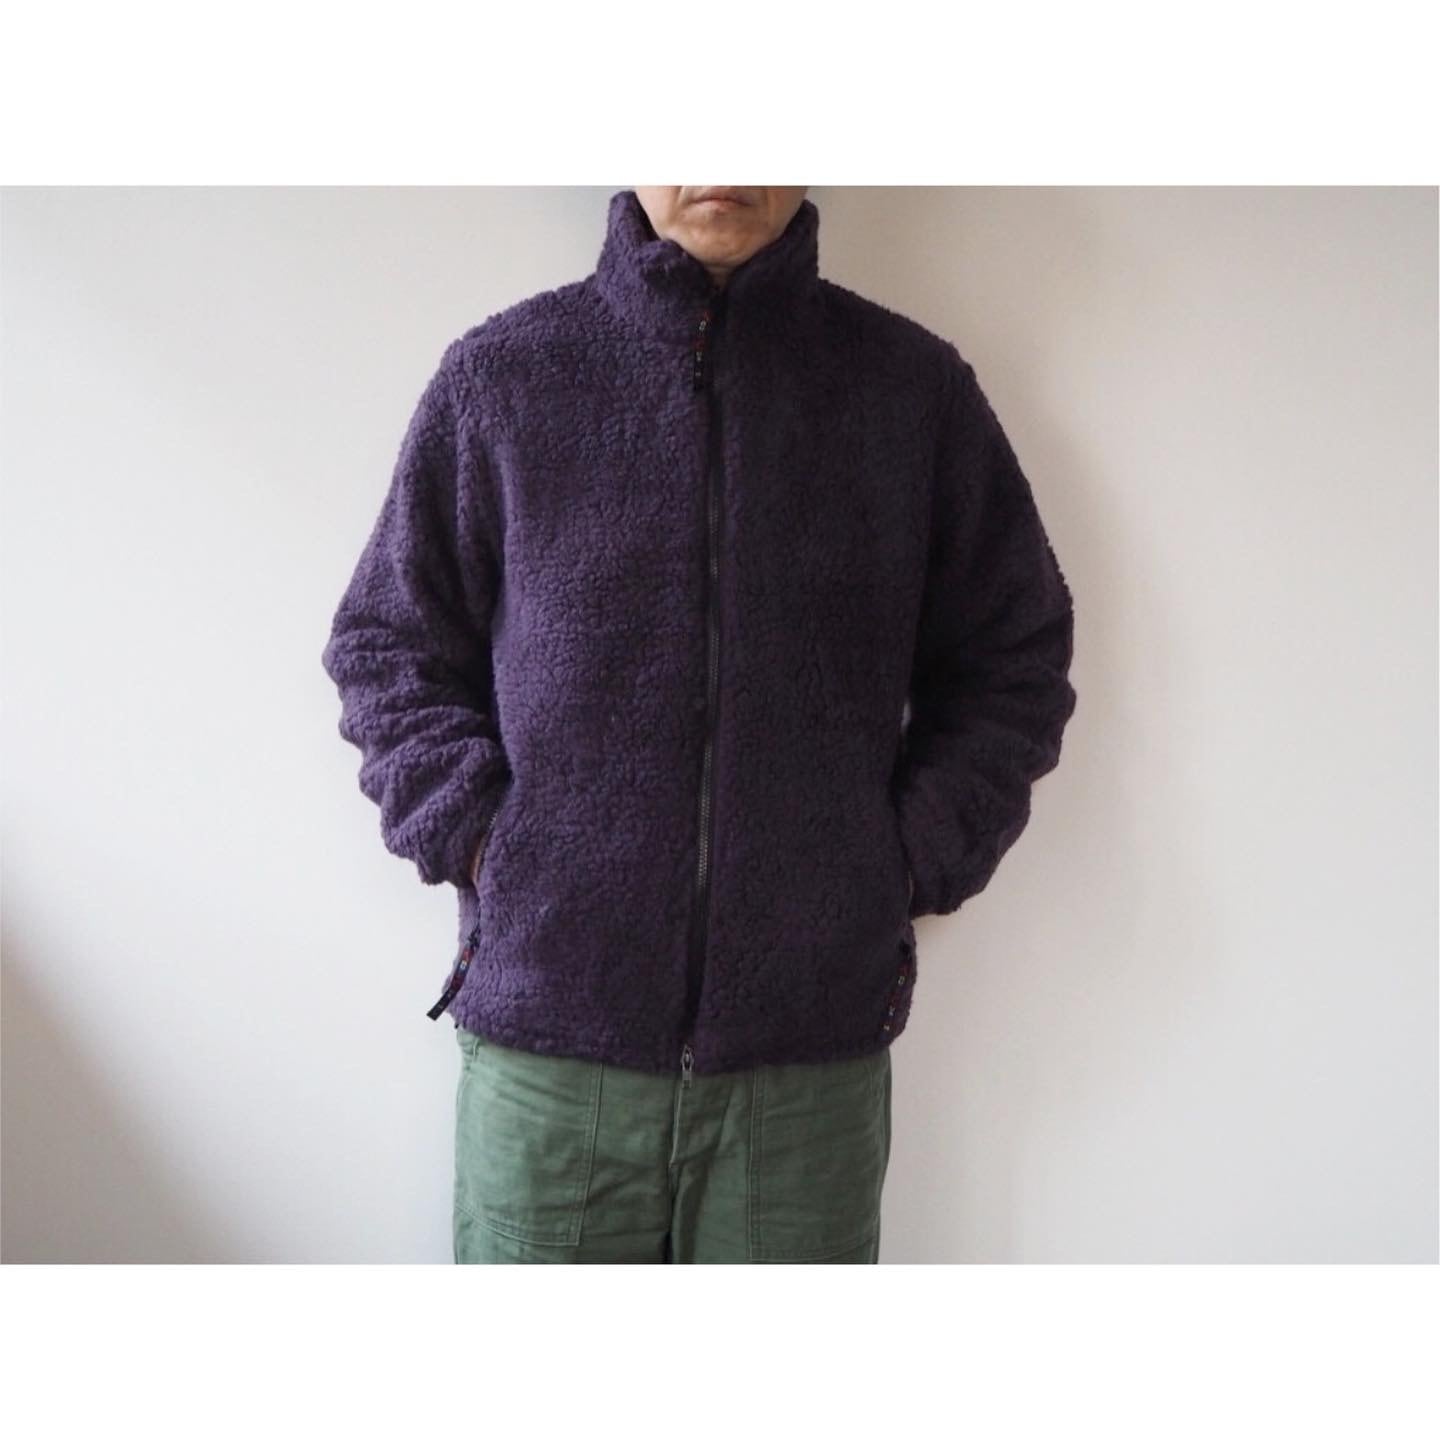 FARFIELD ORIGINAL(ファーフィールド オリジナル) Fell Jacket | AUTHENTIC Life Store  powered by BASE